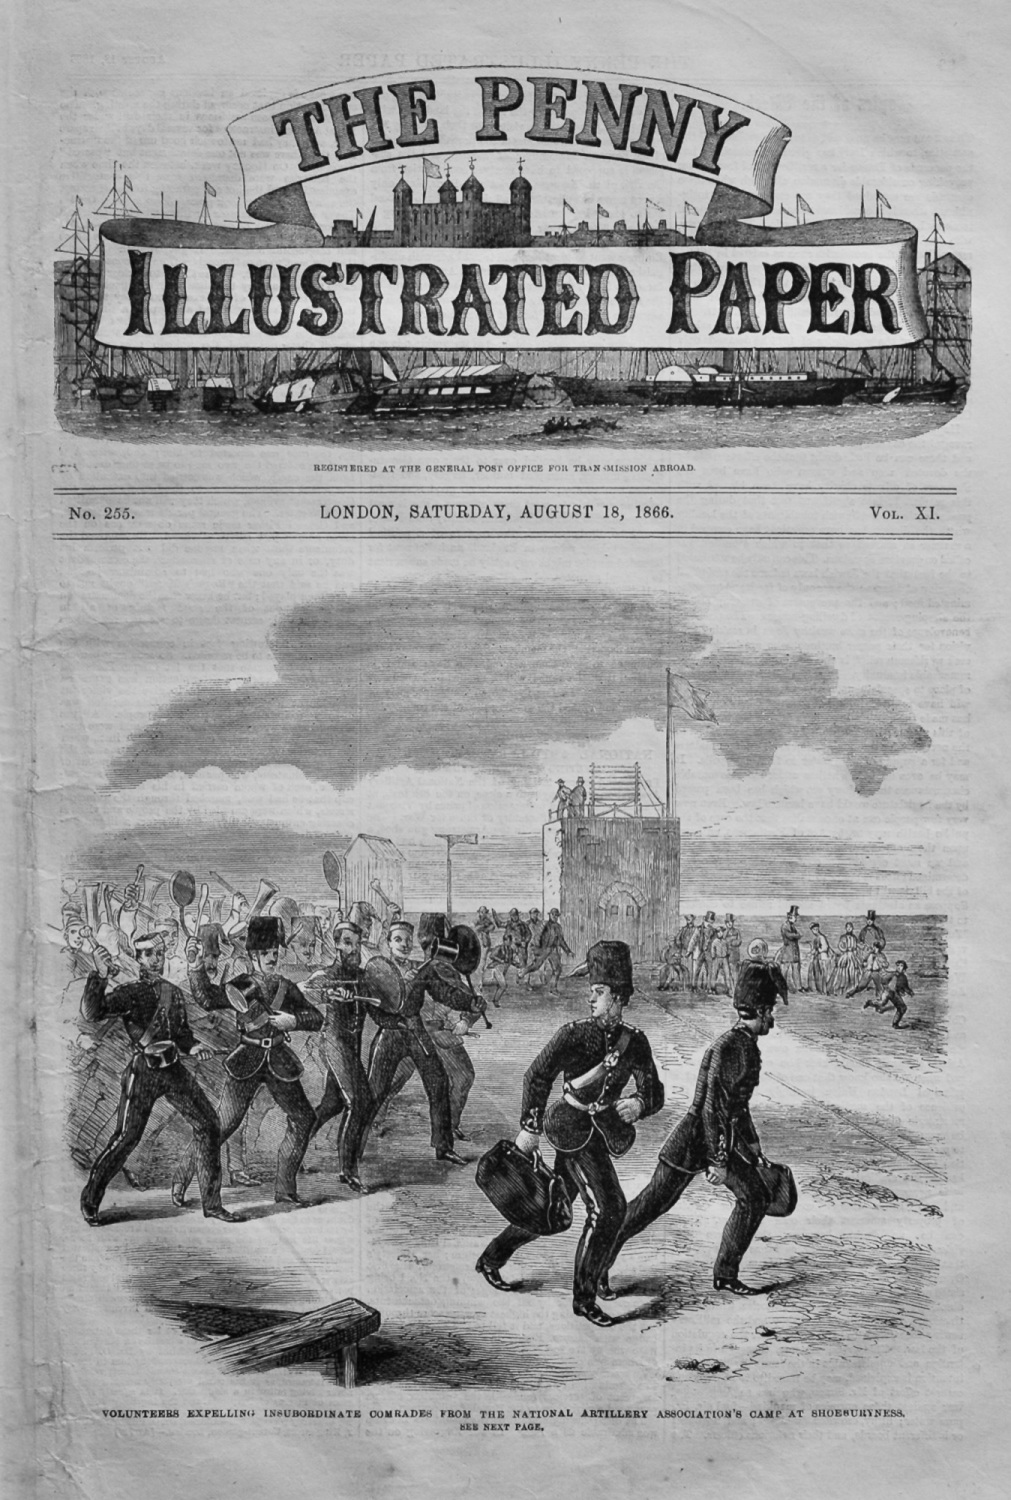 The Penny Illustrated Paper, August 18th, 1866.